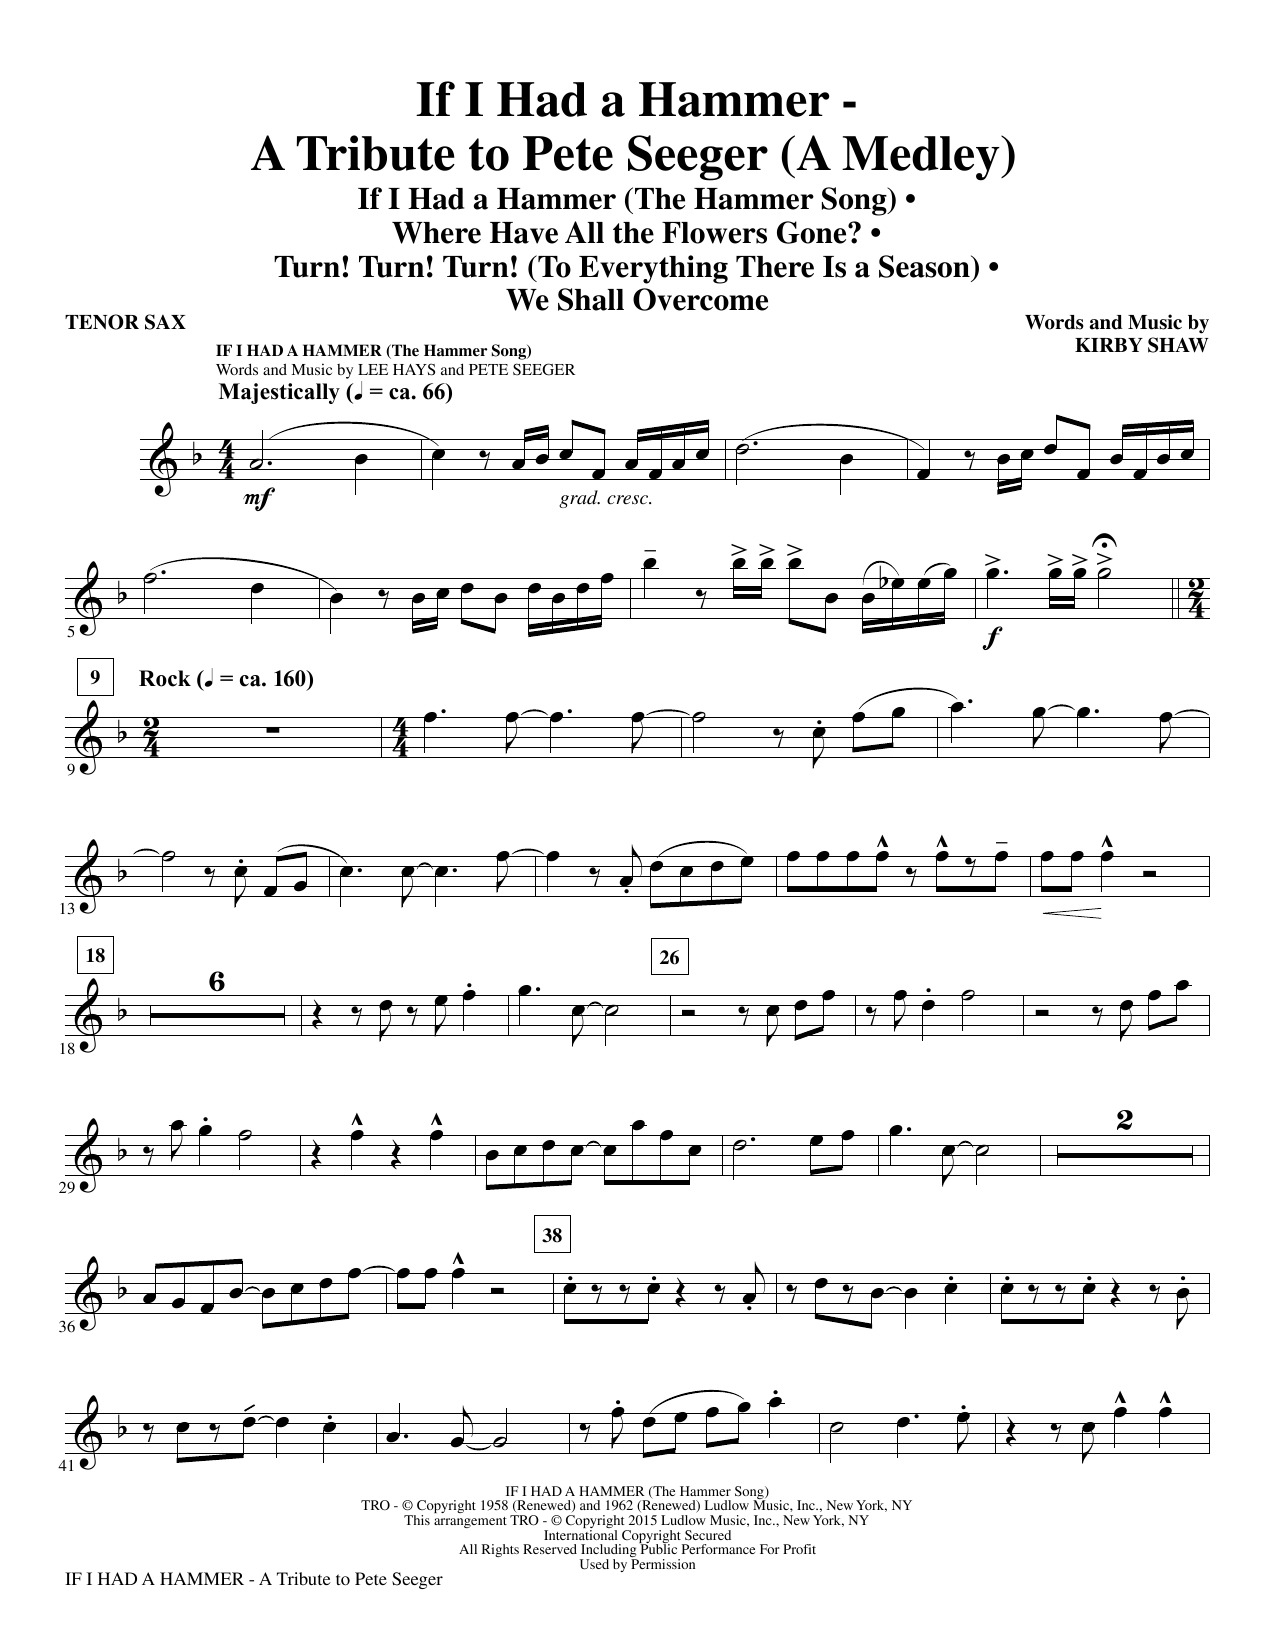 Kirby Shaw If I Had A Hammer - A Tribute to Pete Seeger - Bb Tenor Saxophone sheet music notes and chords. Download Printable PDF.